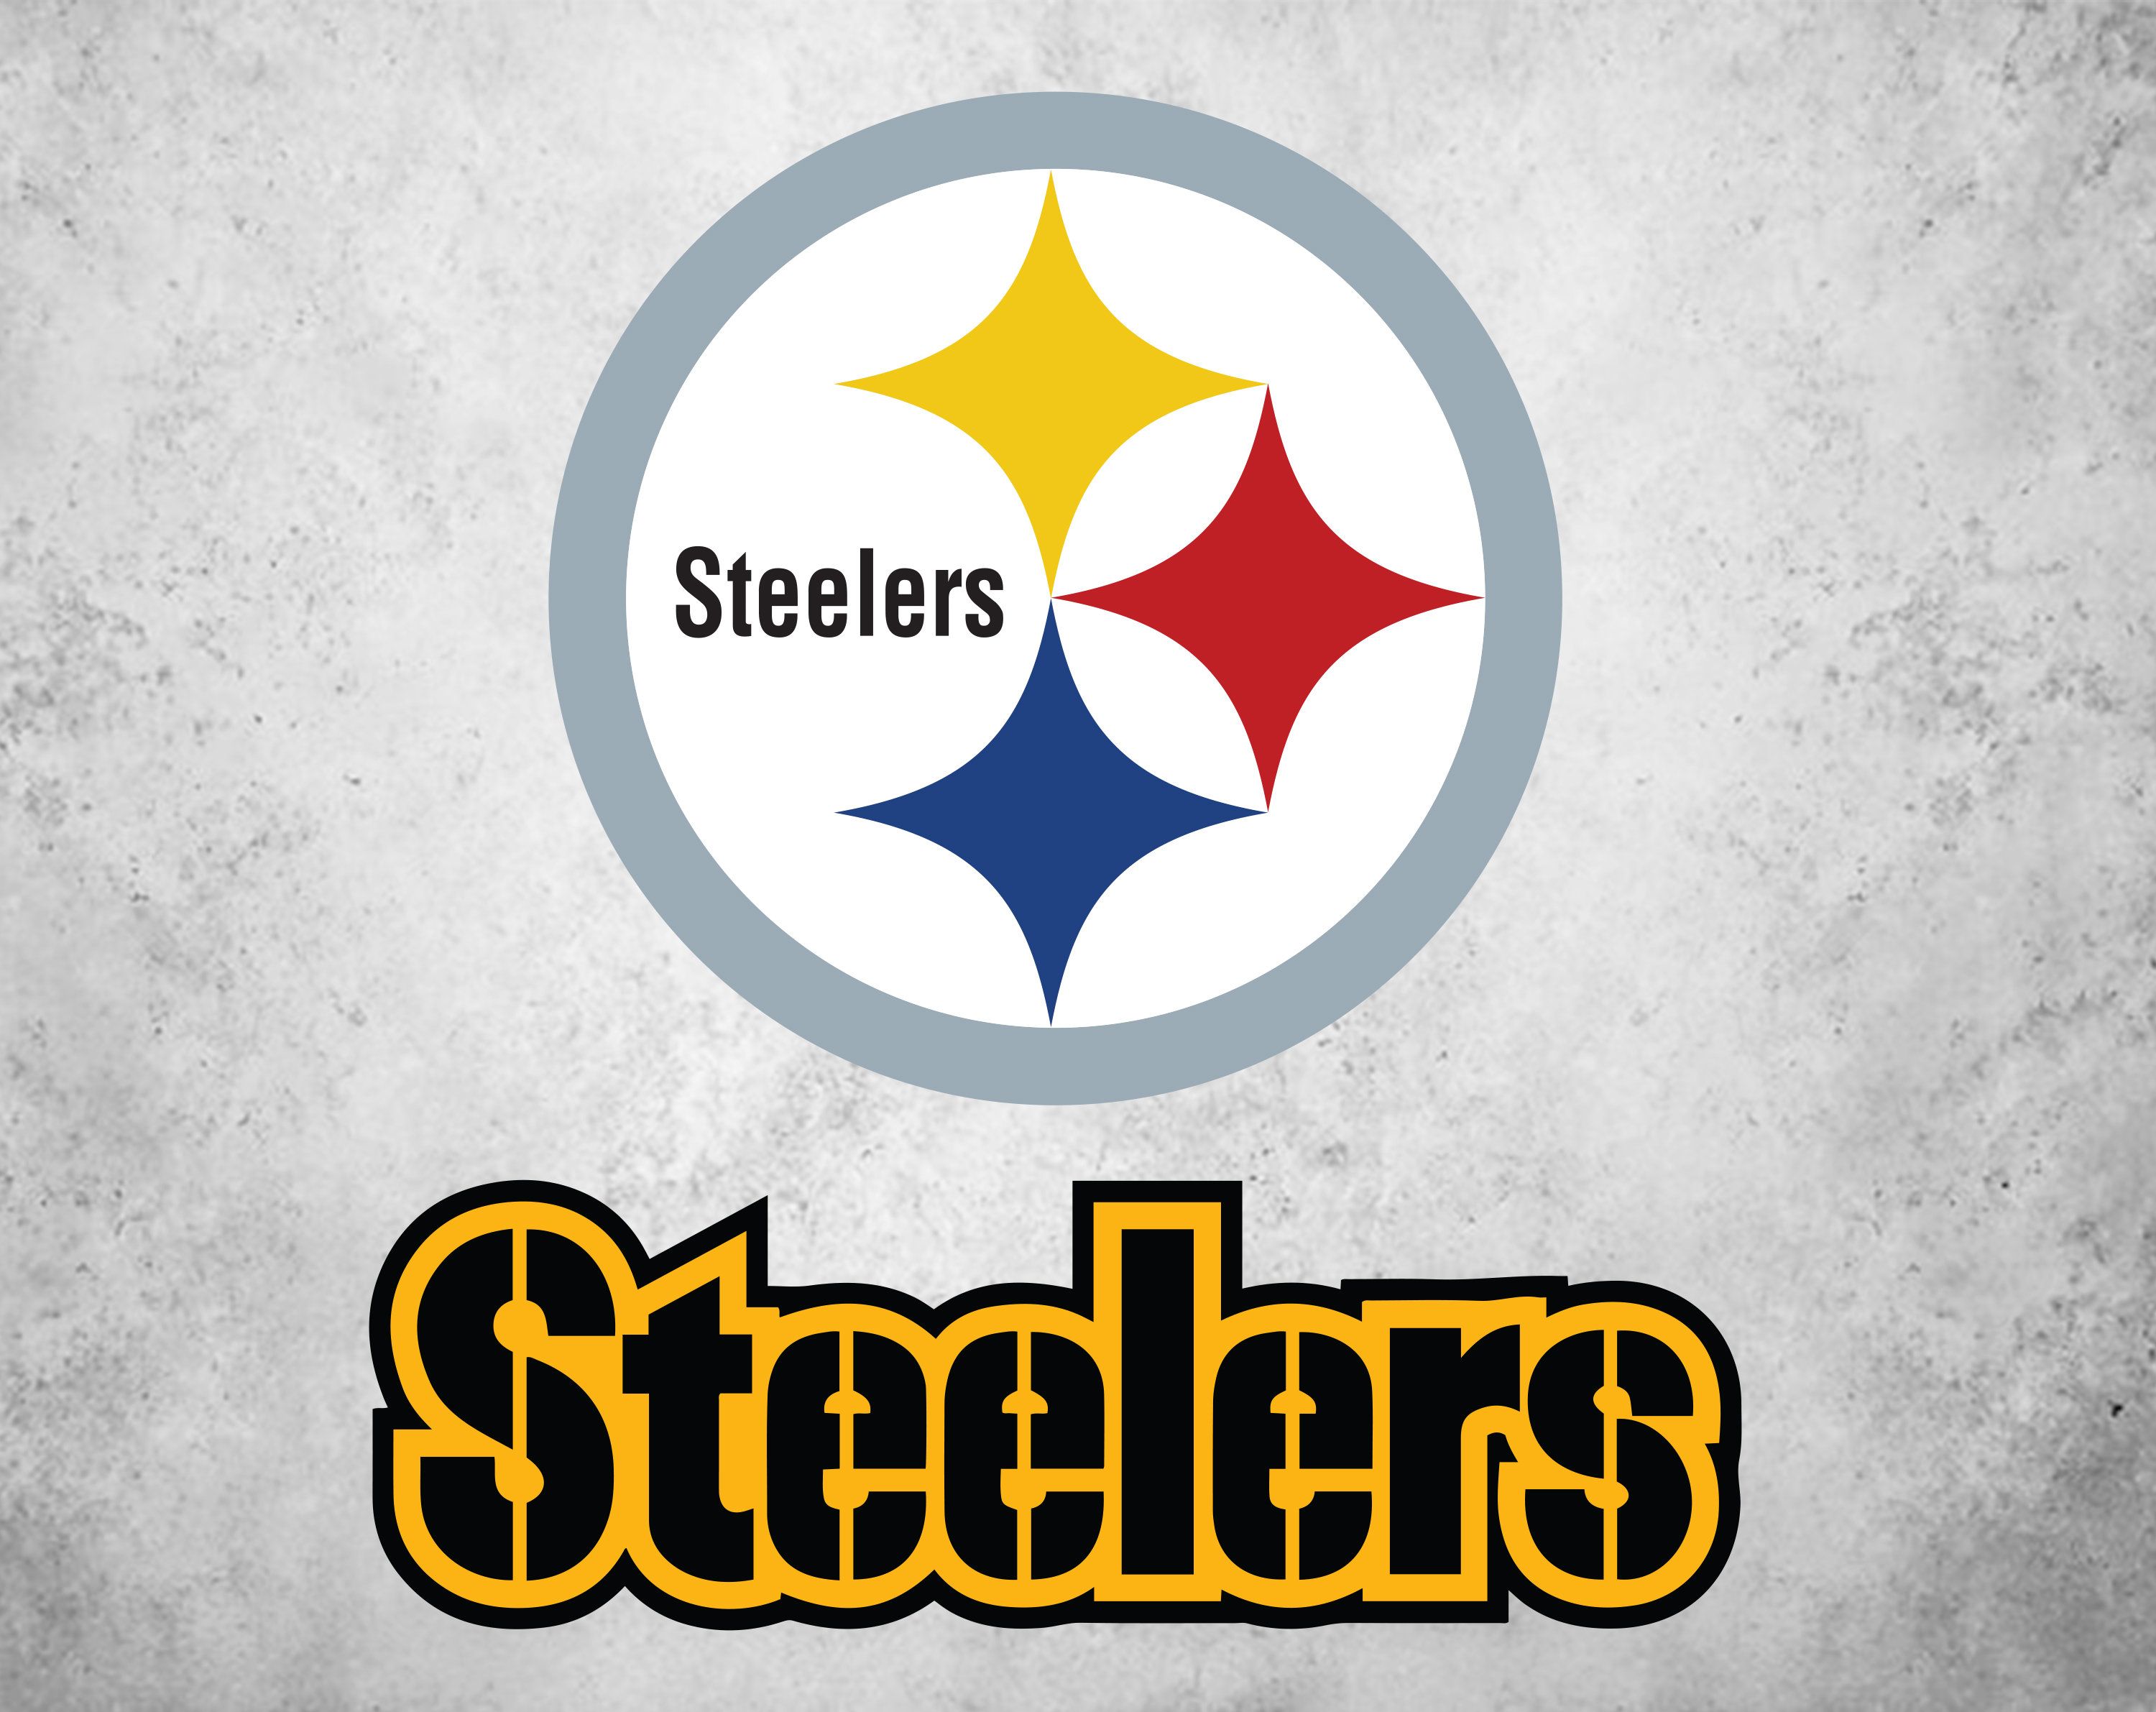 Steelers Vector At Collection Of Steelers Vector Free